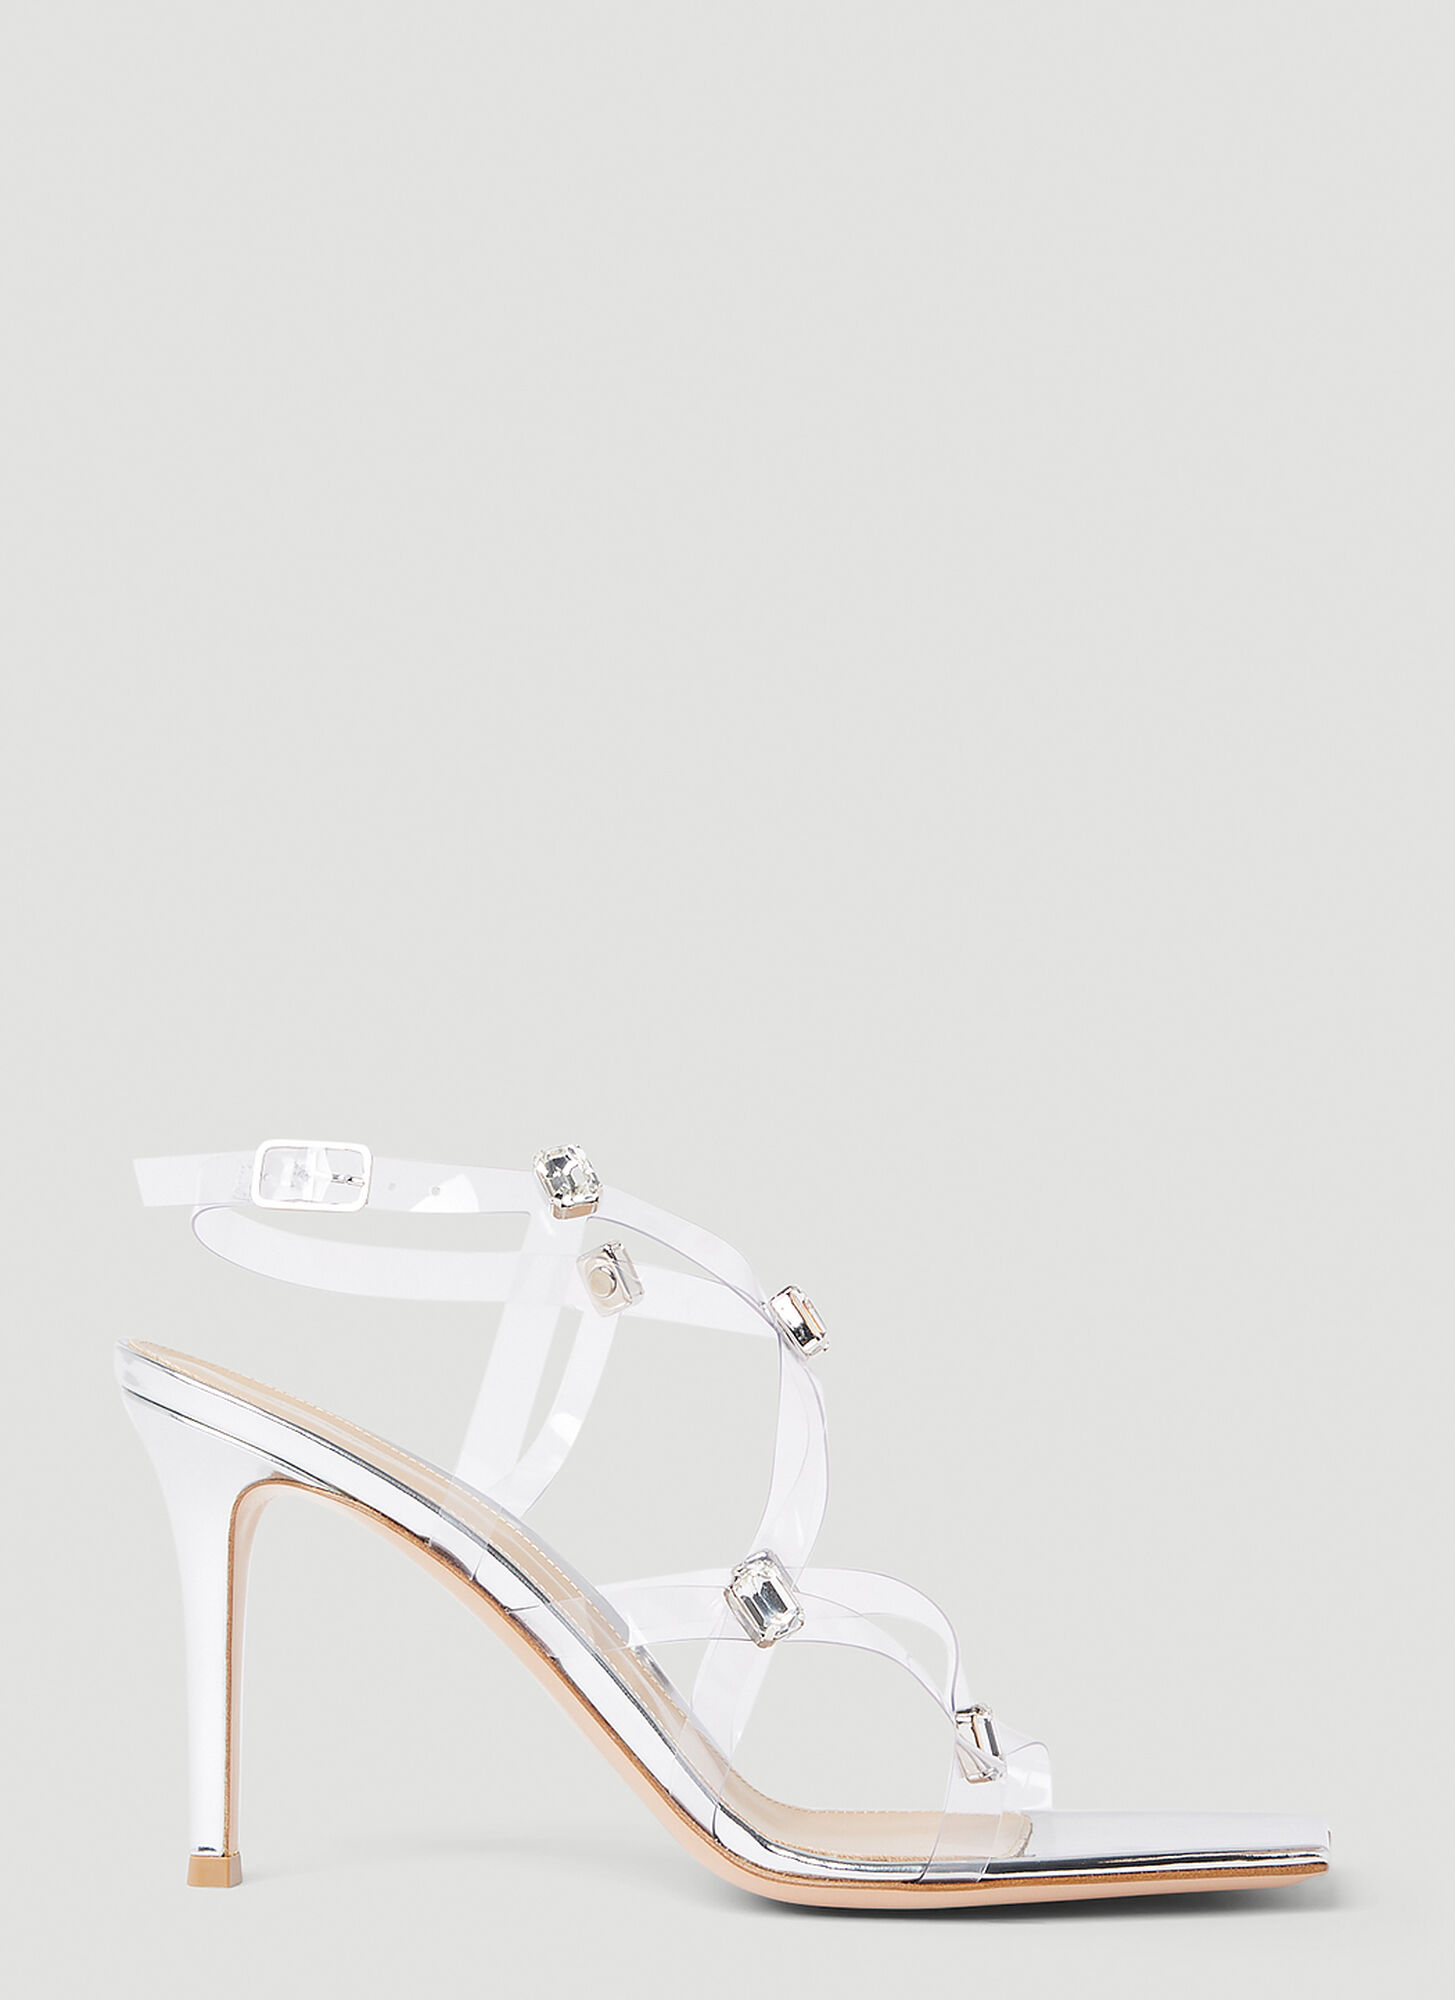 Gianvito Rossi Embellished Strappy Sandals Female Silver